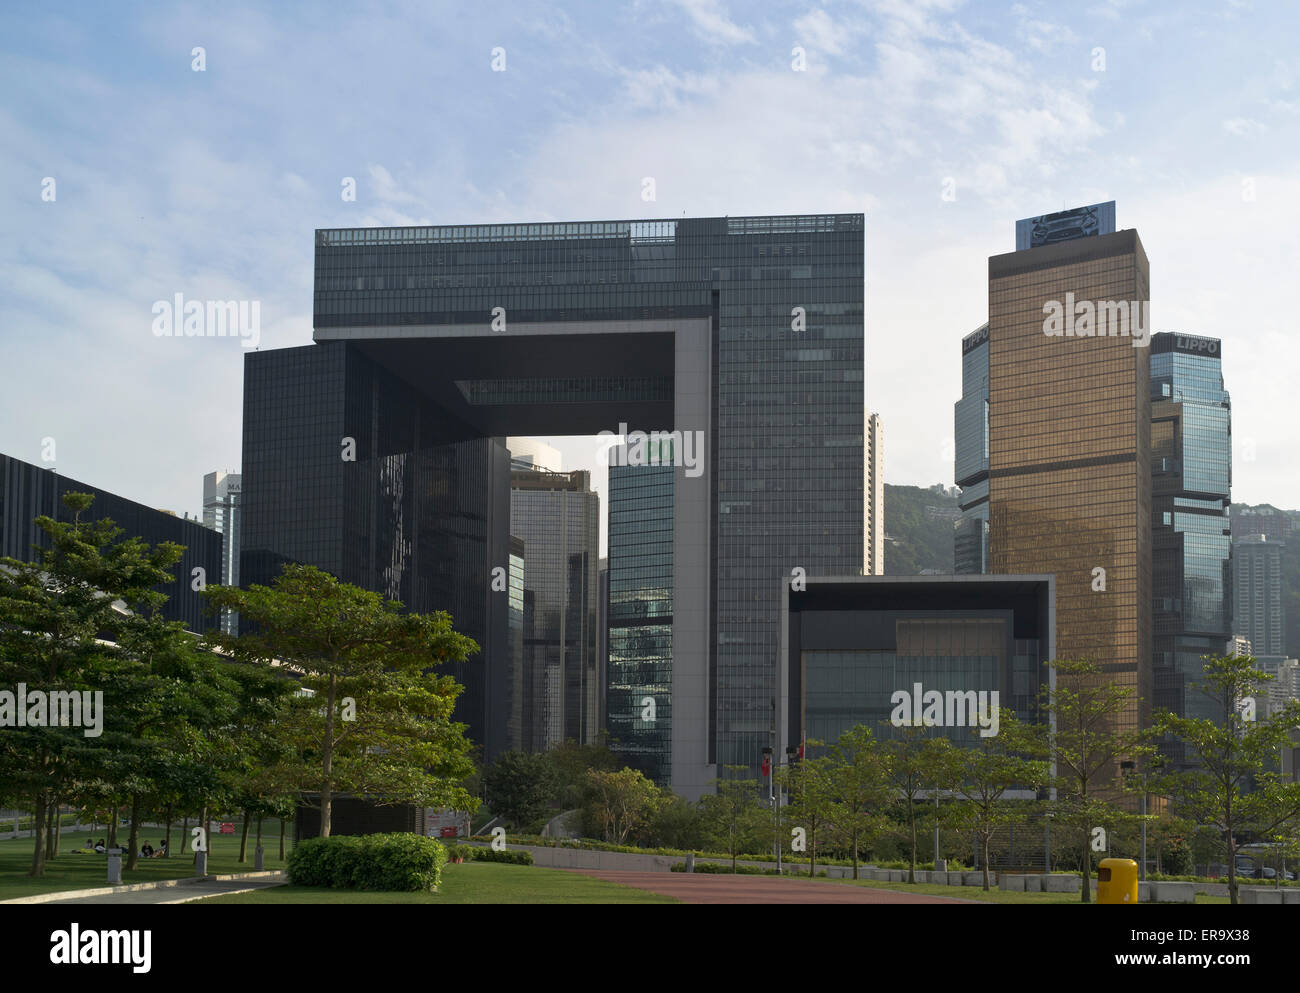 dh Tamar Park ADMIRALTY HONG KONG Central Government building offices buildings modern architecture china Stock Photo